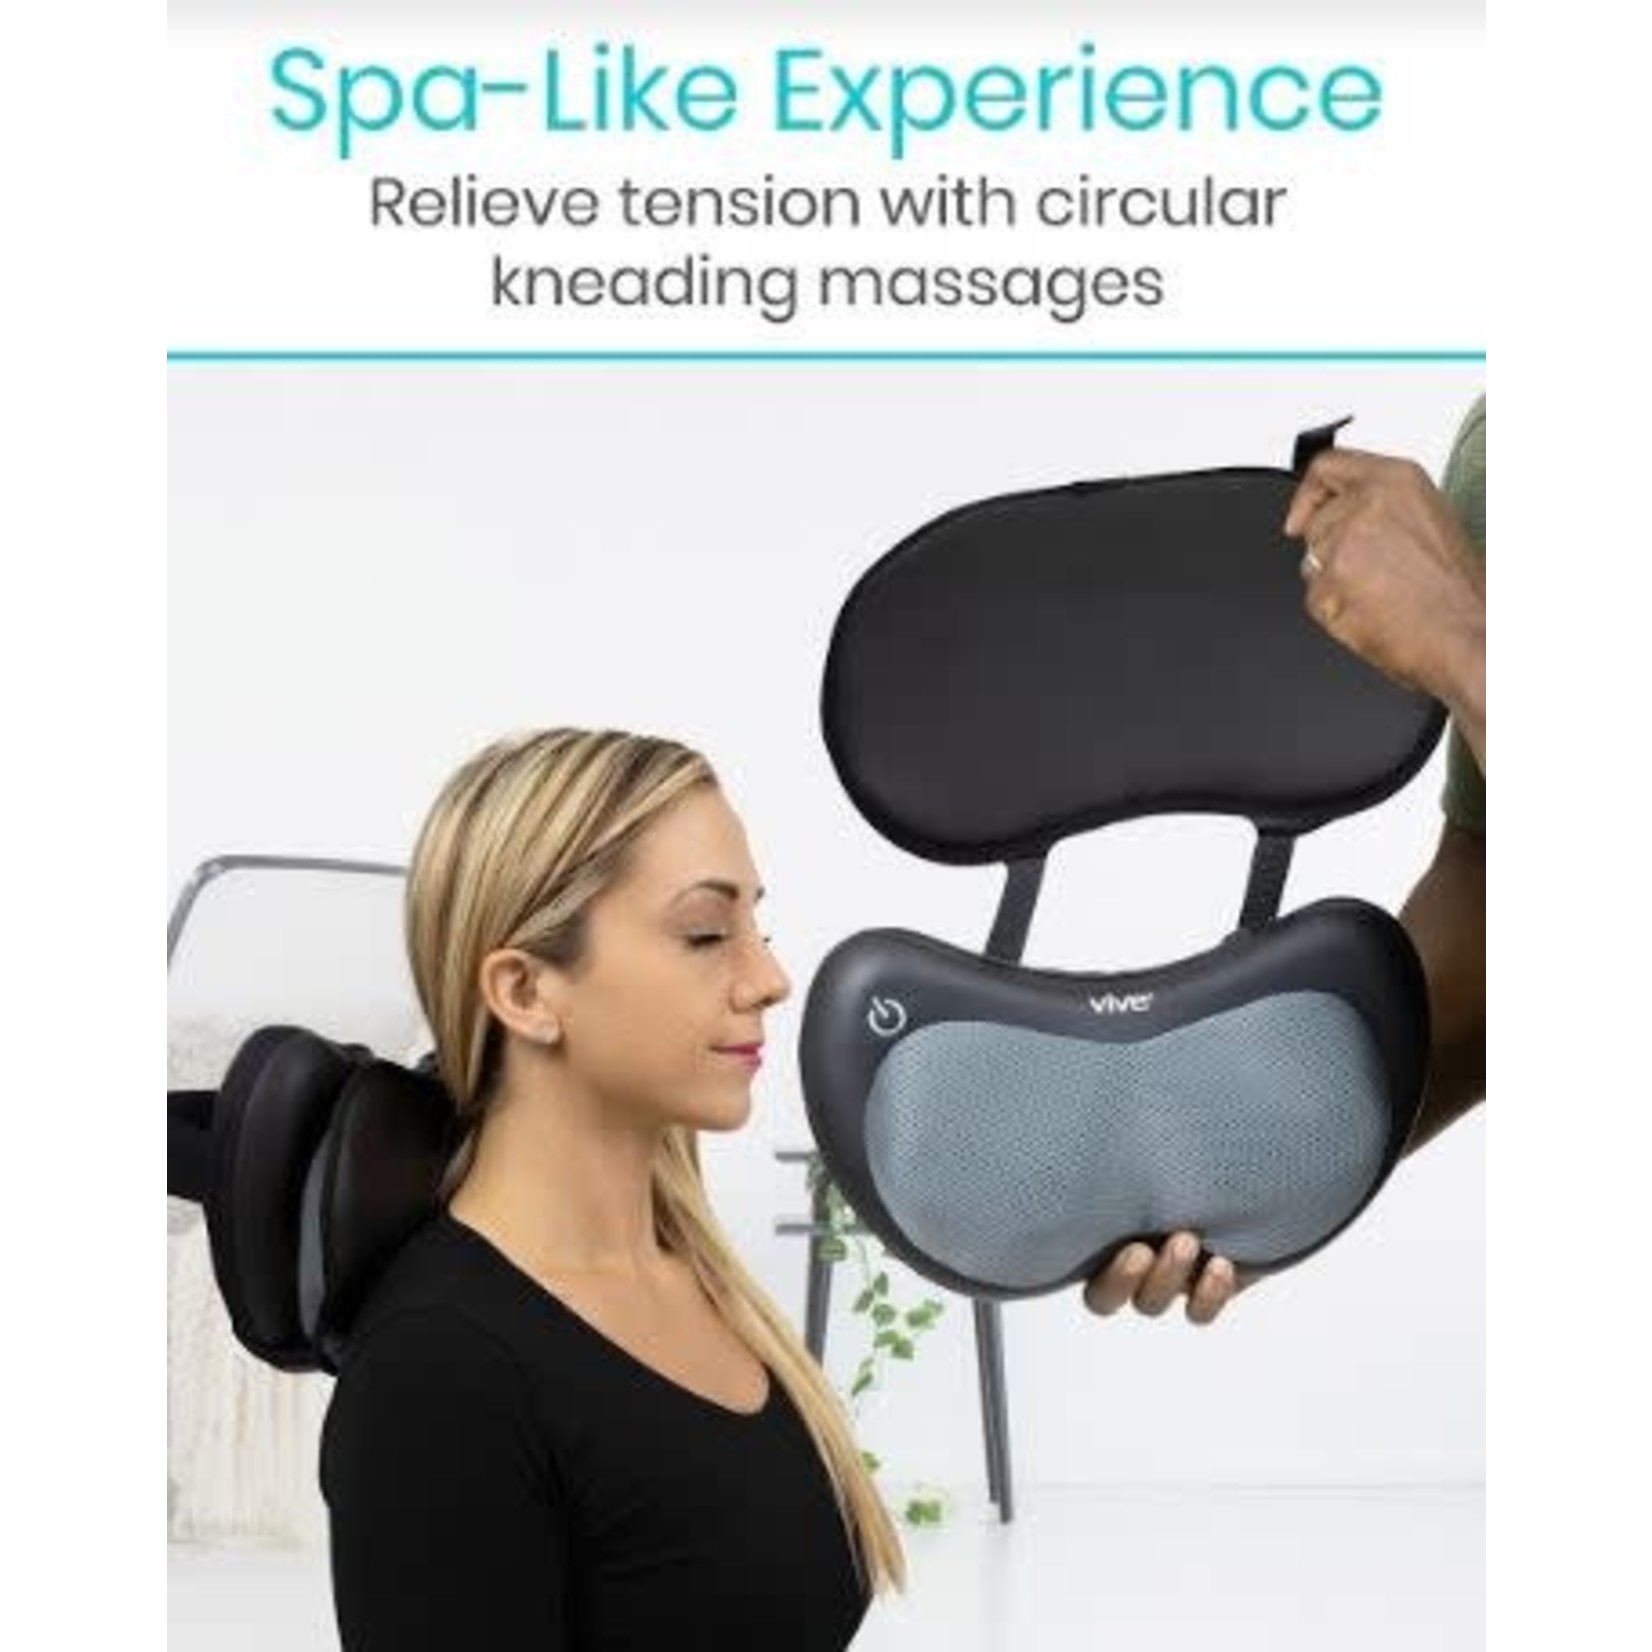 Vive La Vie massage - How to help your neck and don't hesitate to ask for  my popular neck stretch before your next session! Call or text today to  book your appointment!